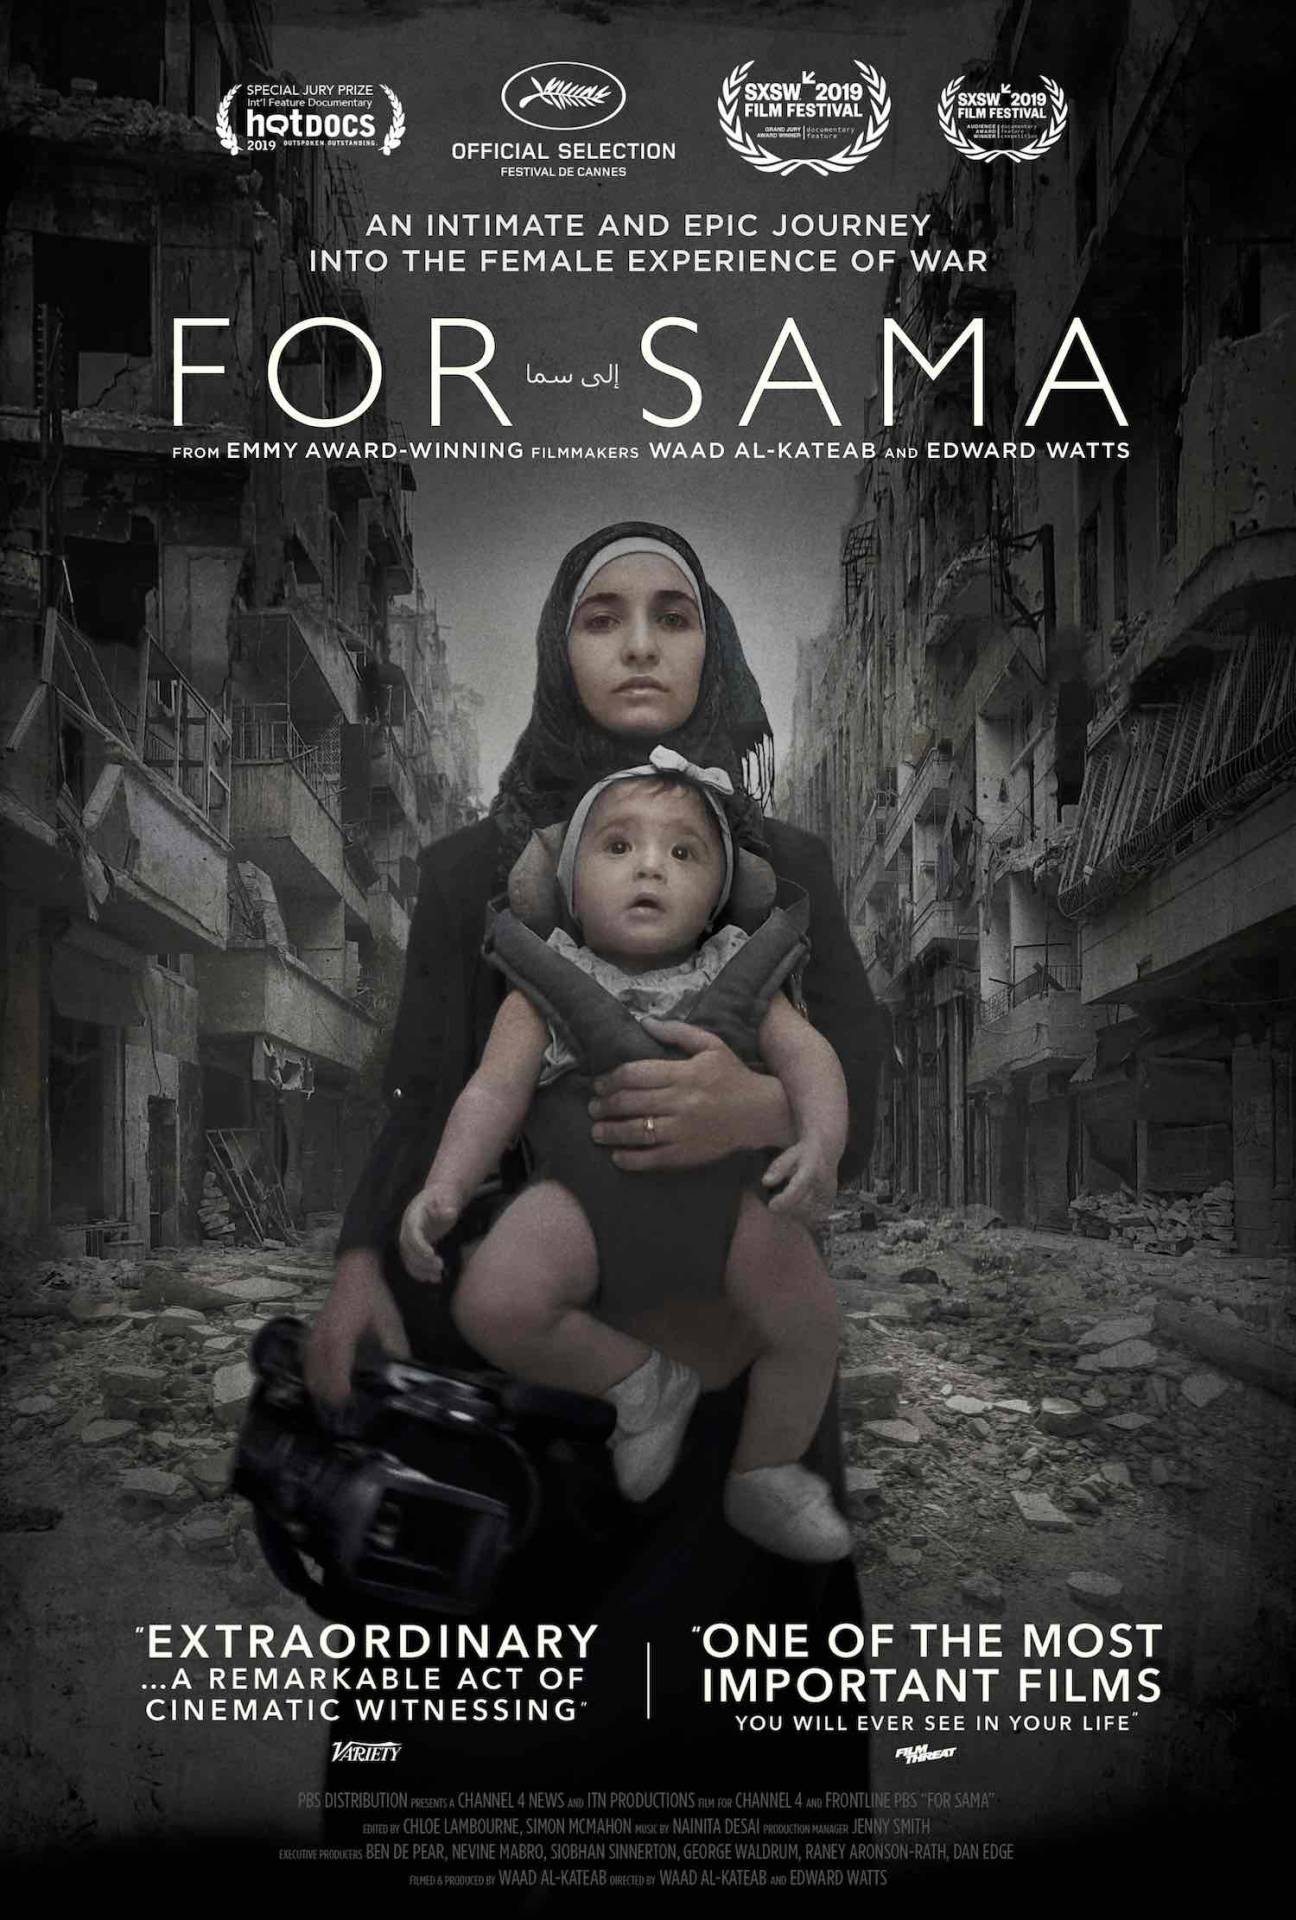 A picture of a woman with a baby girl strapped to her chest standing in a bombed street, film cover of "For Sama" directed by Waad Al-Kateab and Edward Watts